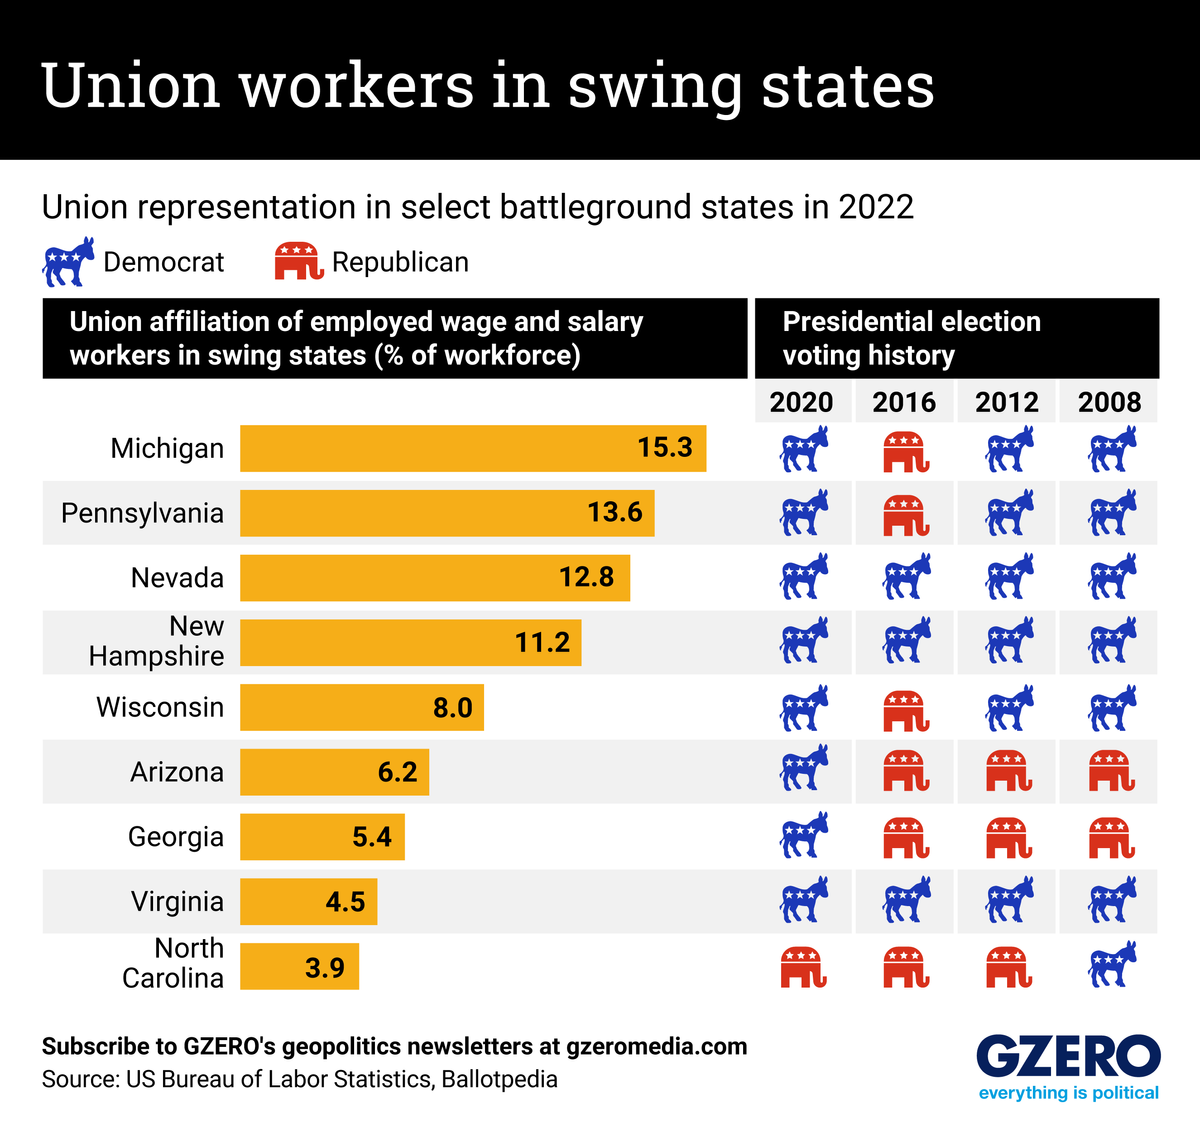 The Graphic Truth: Union workers in swing states